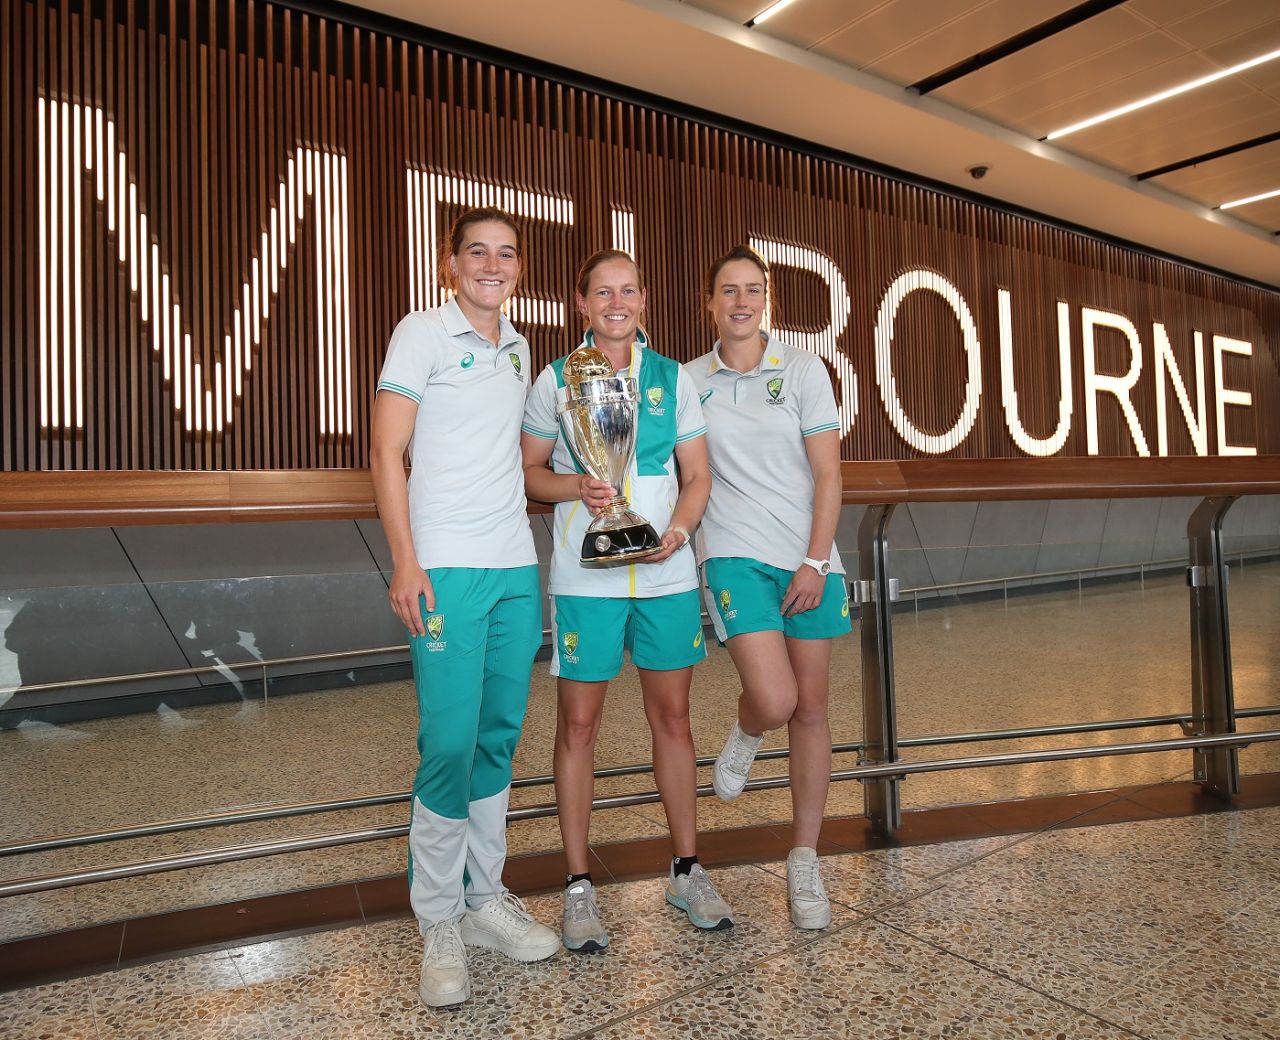 Annabel Sutherland, Meg Lanning and Ellyse Perry pose after arriving in Melbourne, Women's World Cup 2022, April 5, 2022